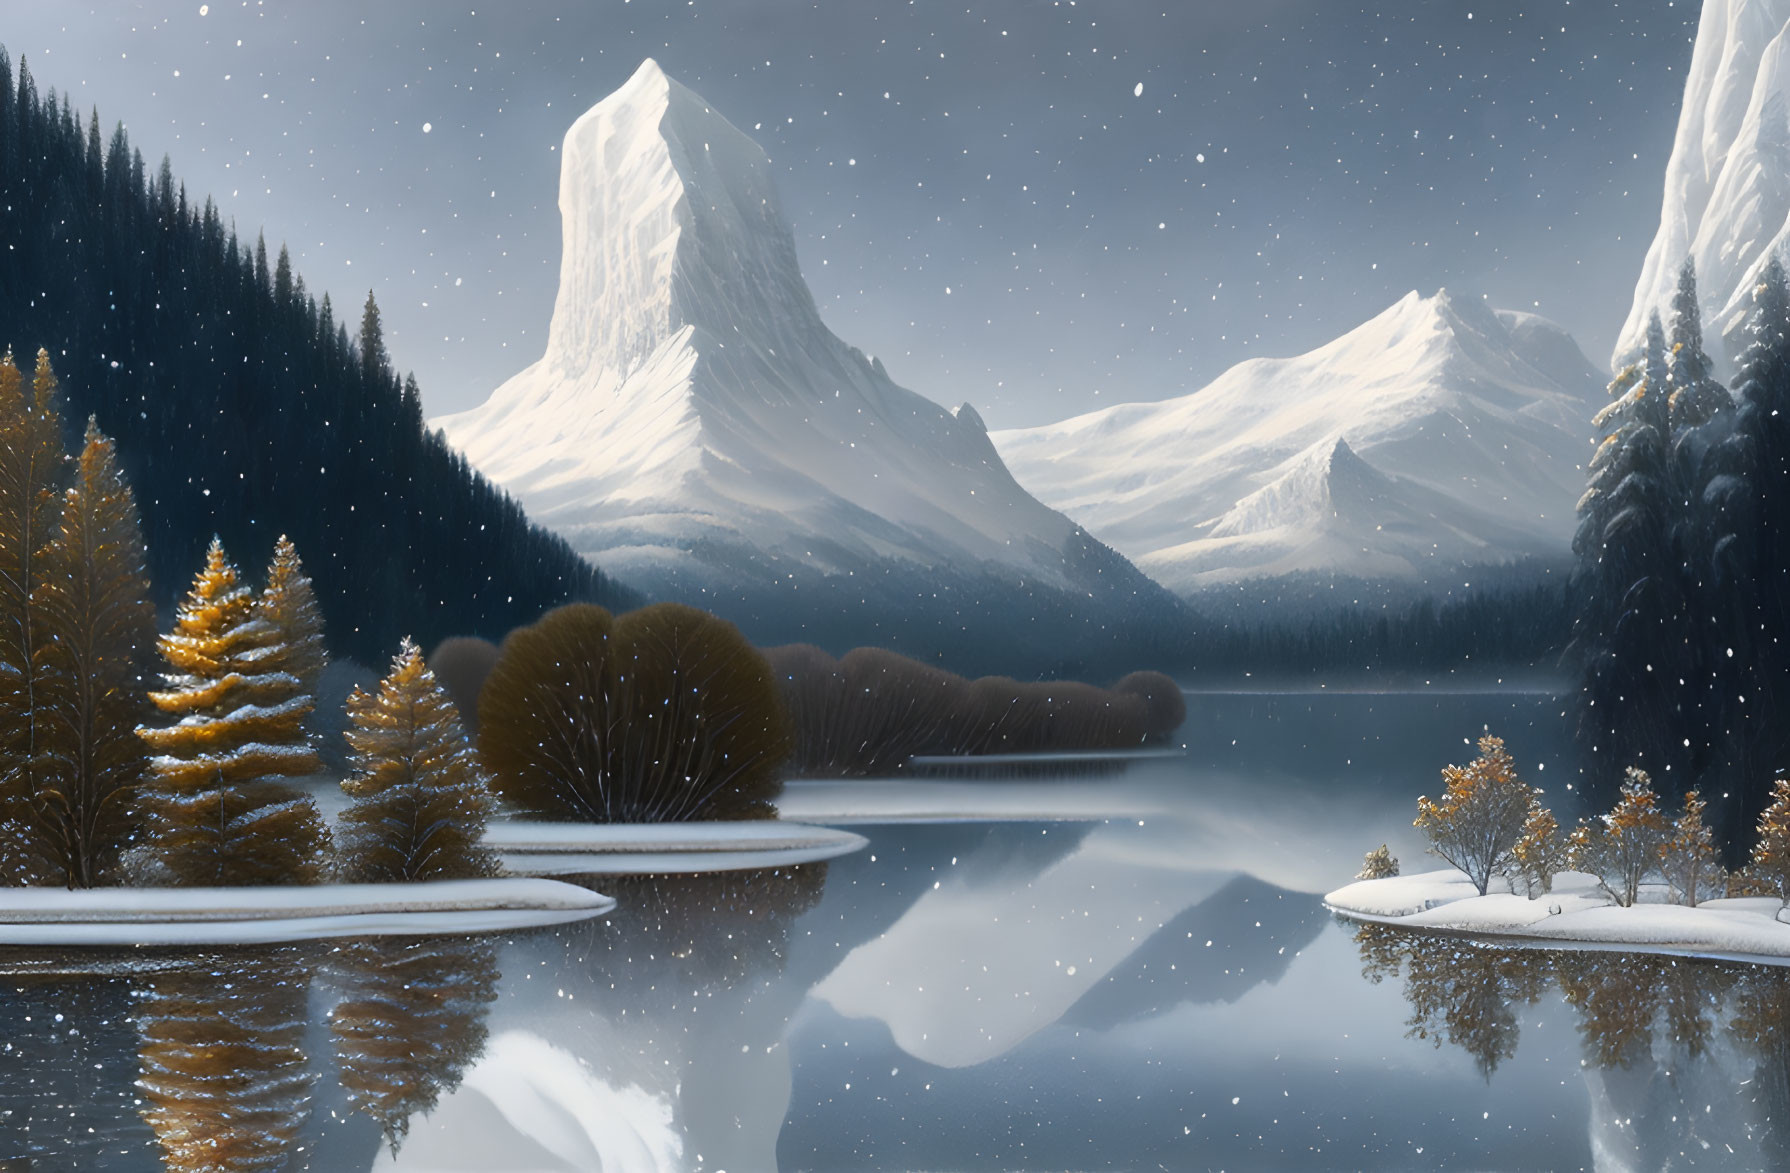 Snowy Winter Landscape: Trees, Lake, Snowflakes, Mountains at Dusk